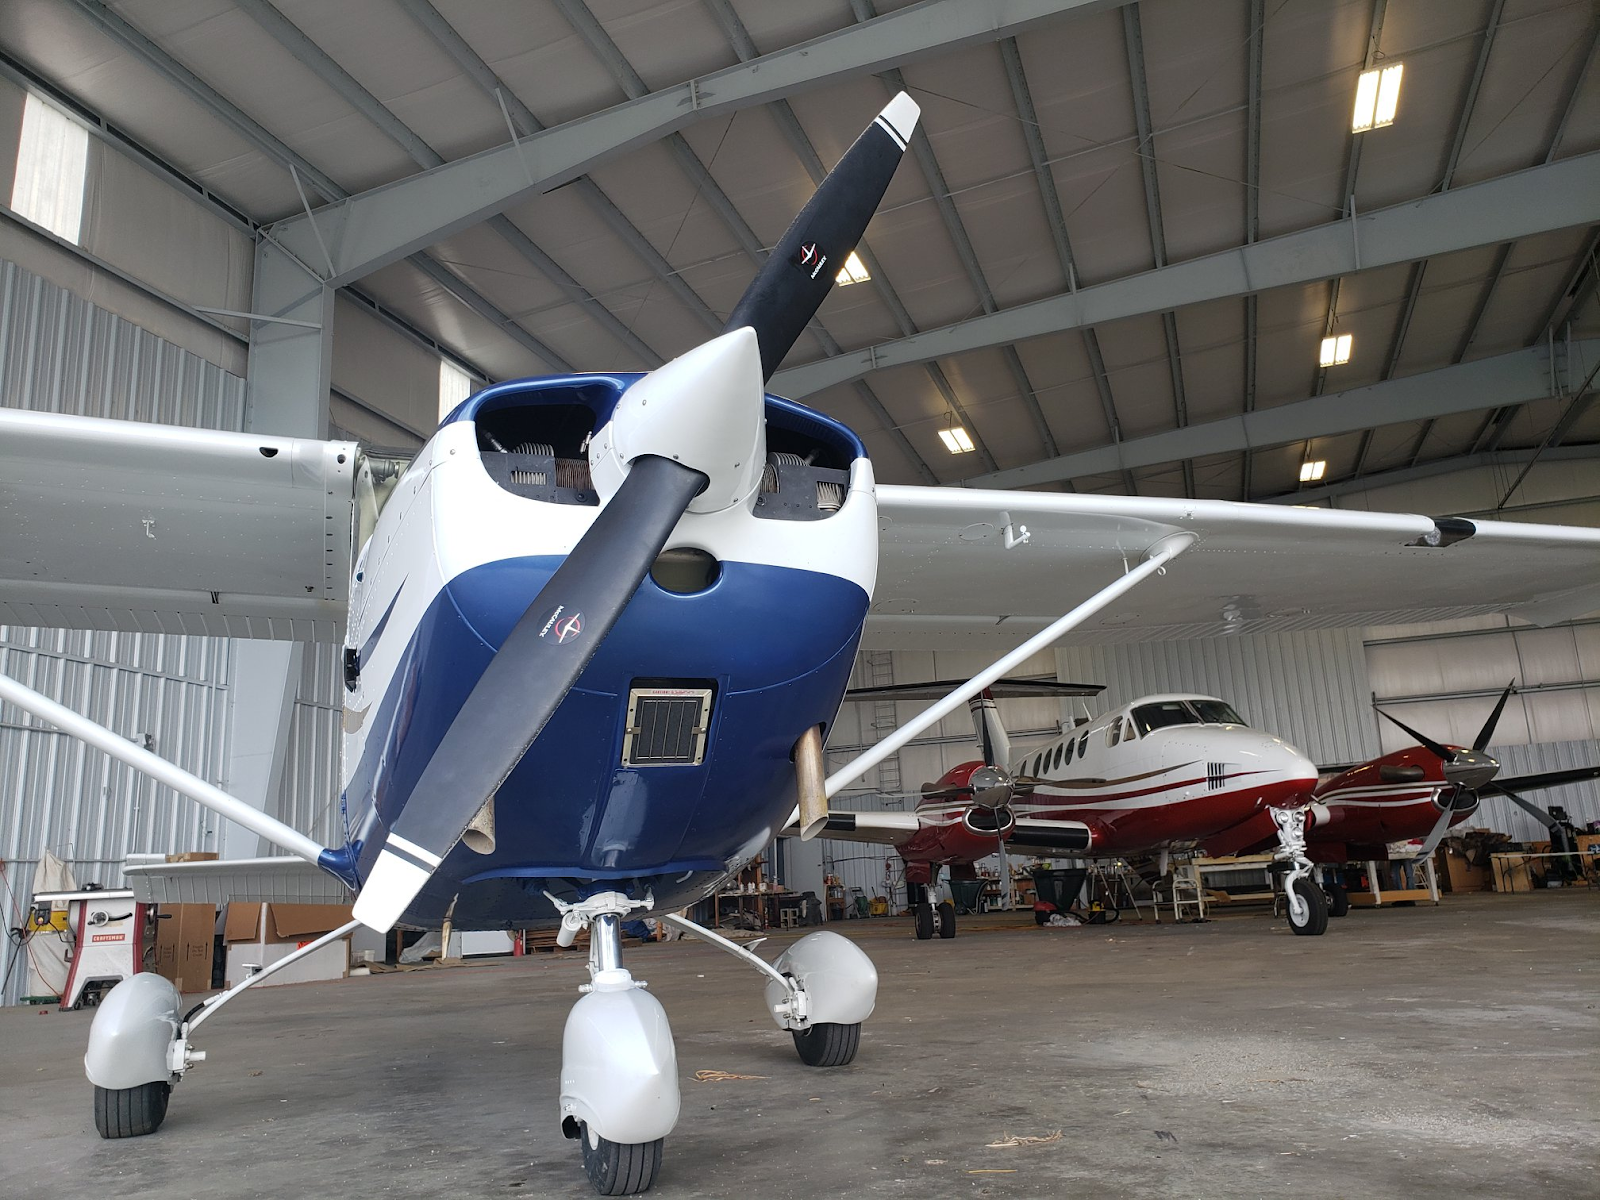 Two serviced airplanes parked in the Southern Air Customs hangar. Clay Lacy review